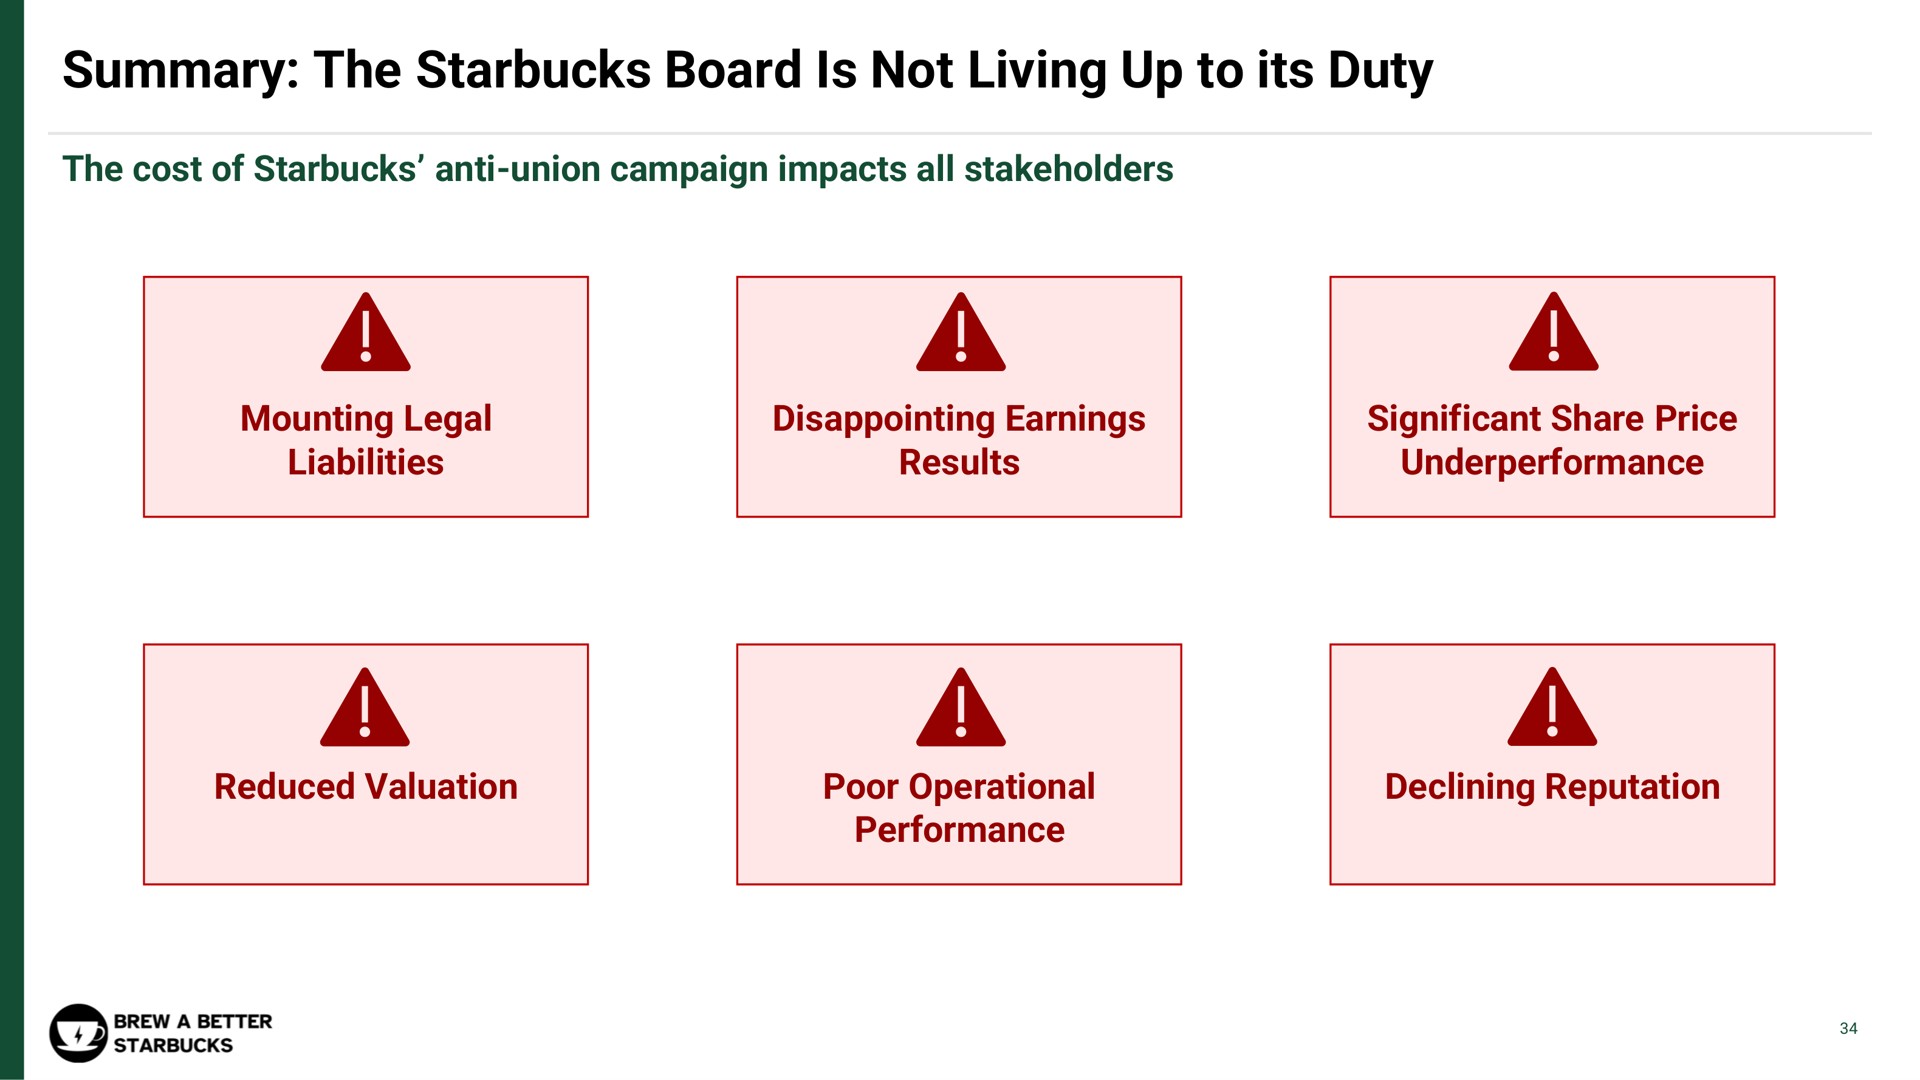 summary the board is not living up to its duty a a a a a a | Strategic Organizing Center